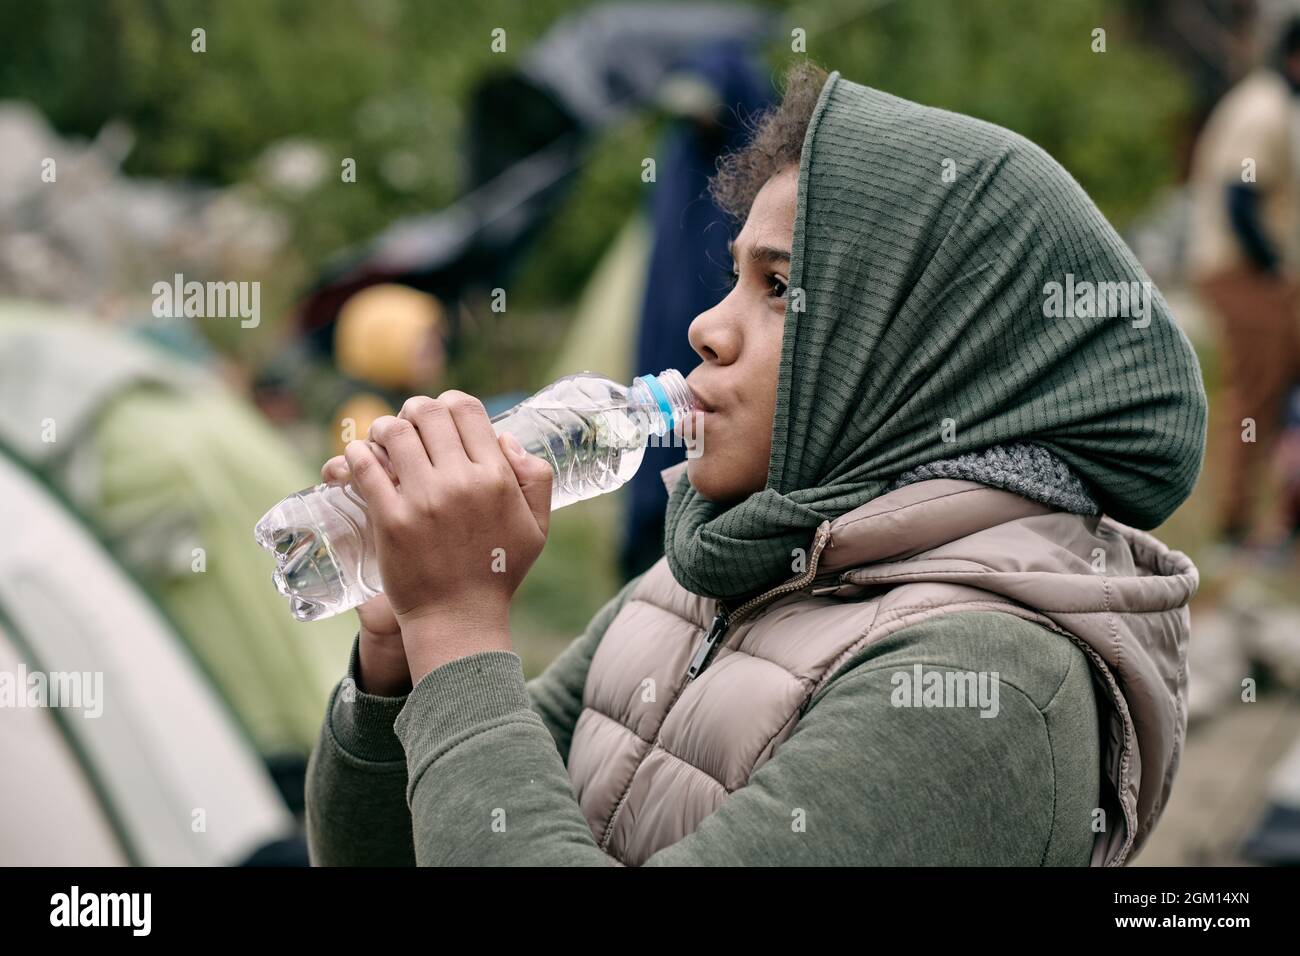 Teenage middle-eastern girl with scarf covering head drinking water greedily in refugee camp Stock Photo